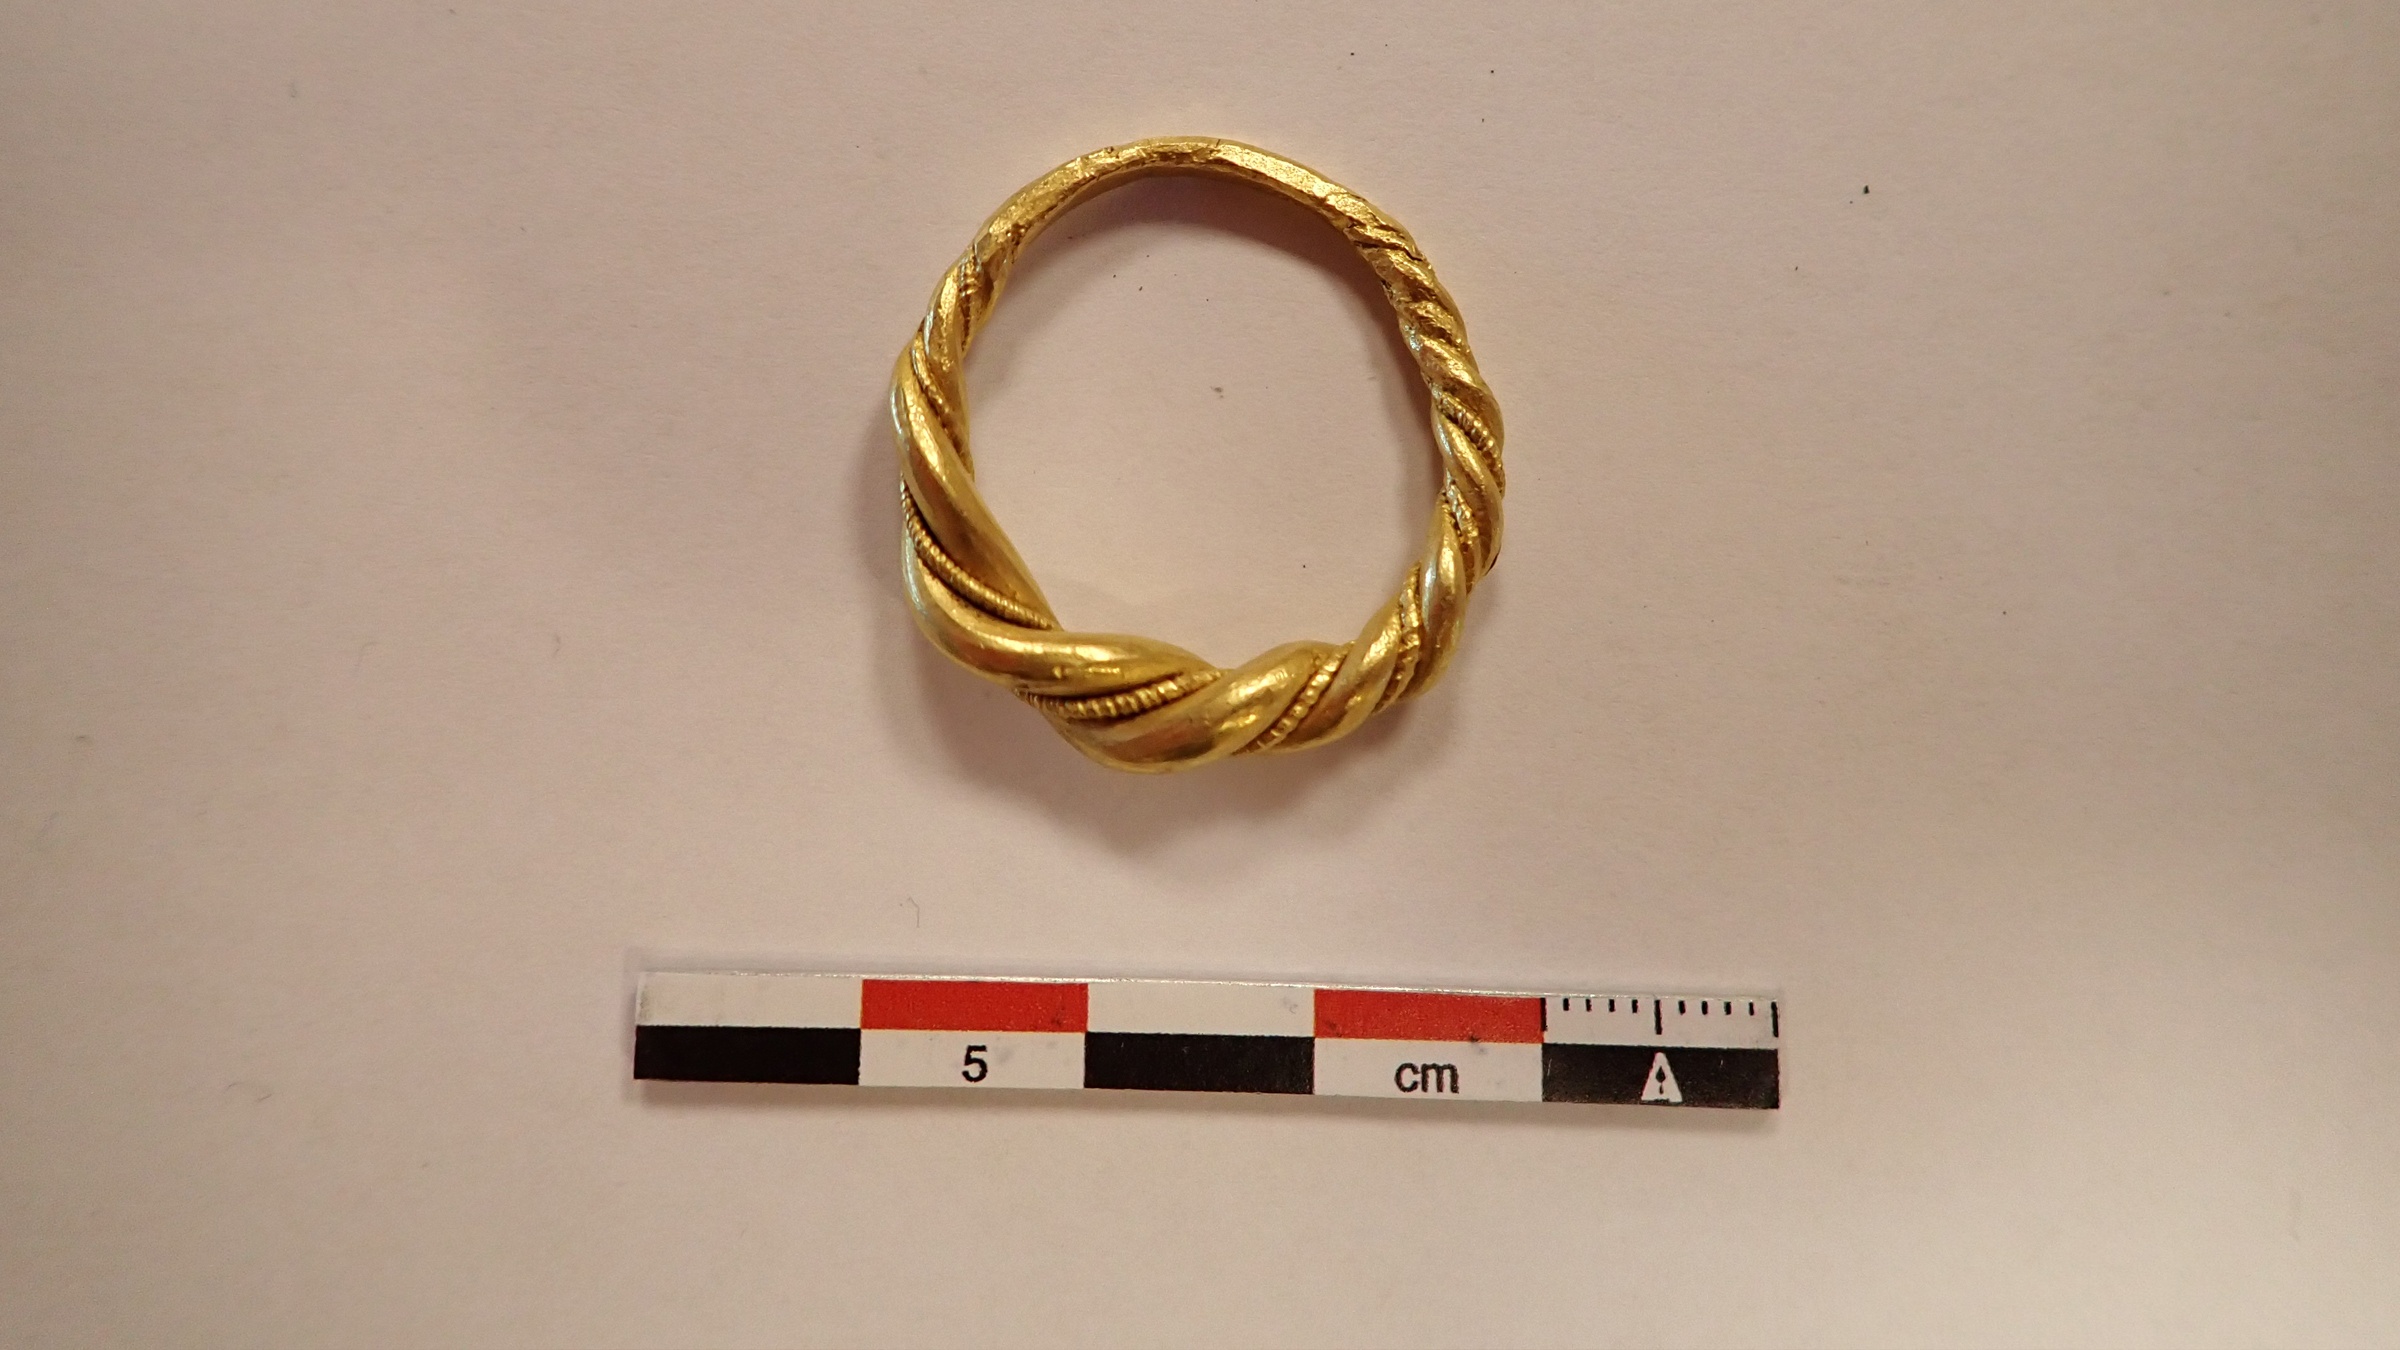 Archaeologists think the gold ring was made between 1,000 and 1,300 years ago, and that it once belonged to a powerful Viking chief.